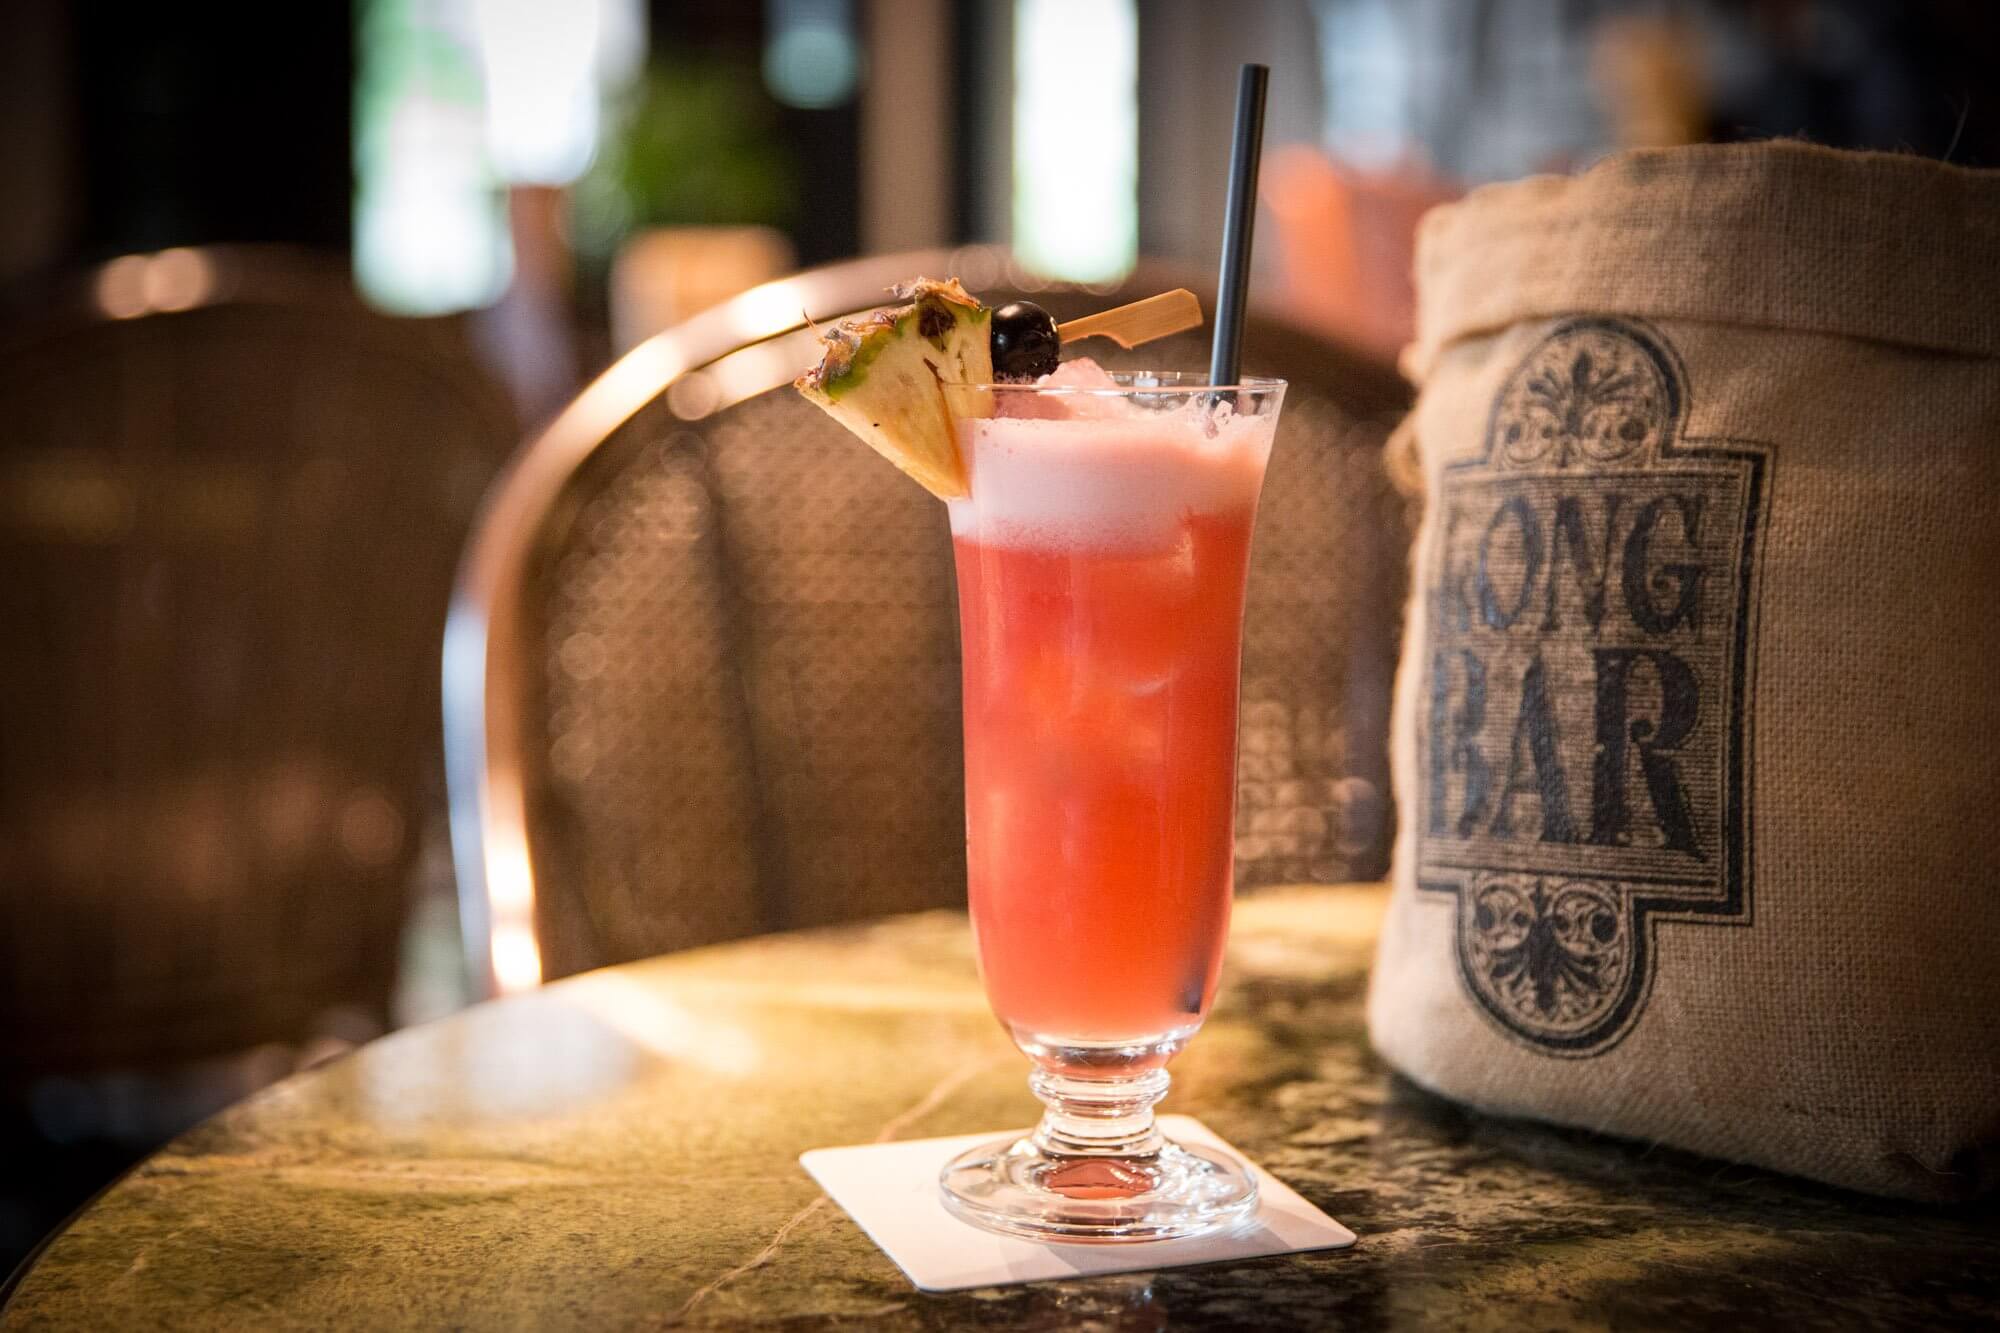 An original Singapore Sling at the Raffles Hotel Long Bar where the cocktail was invented